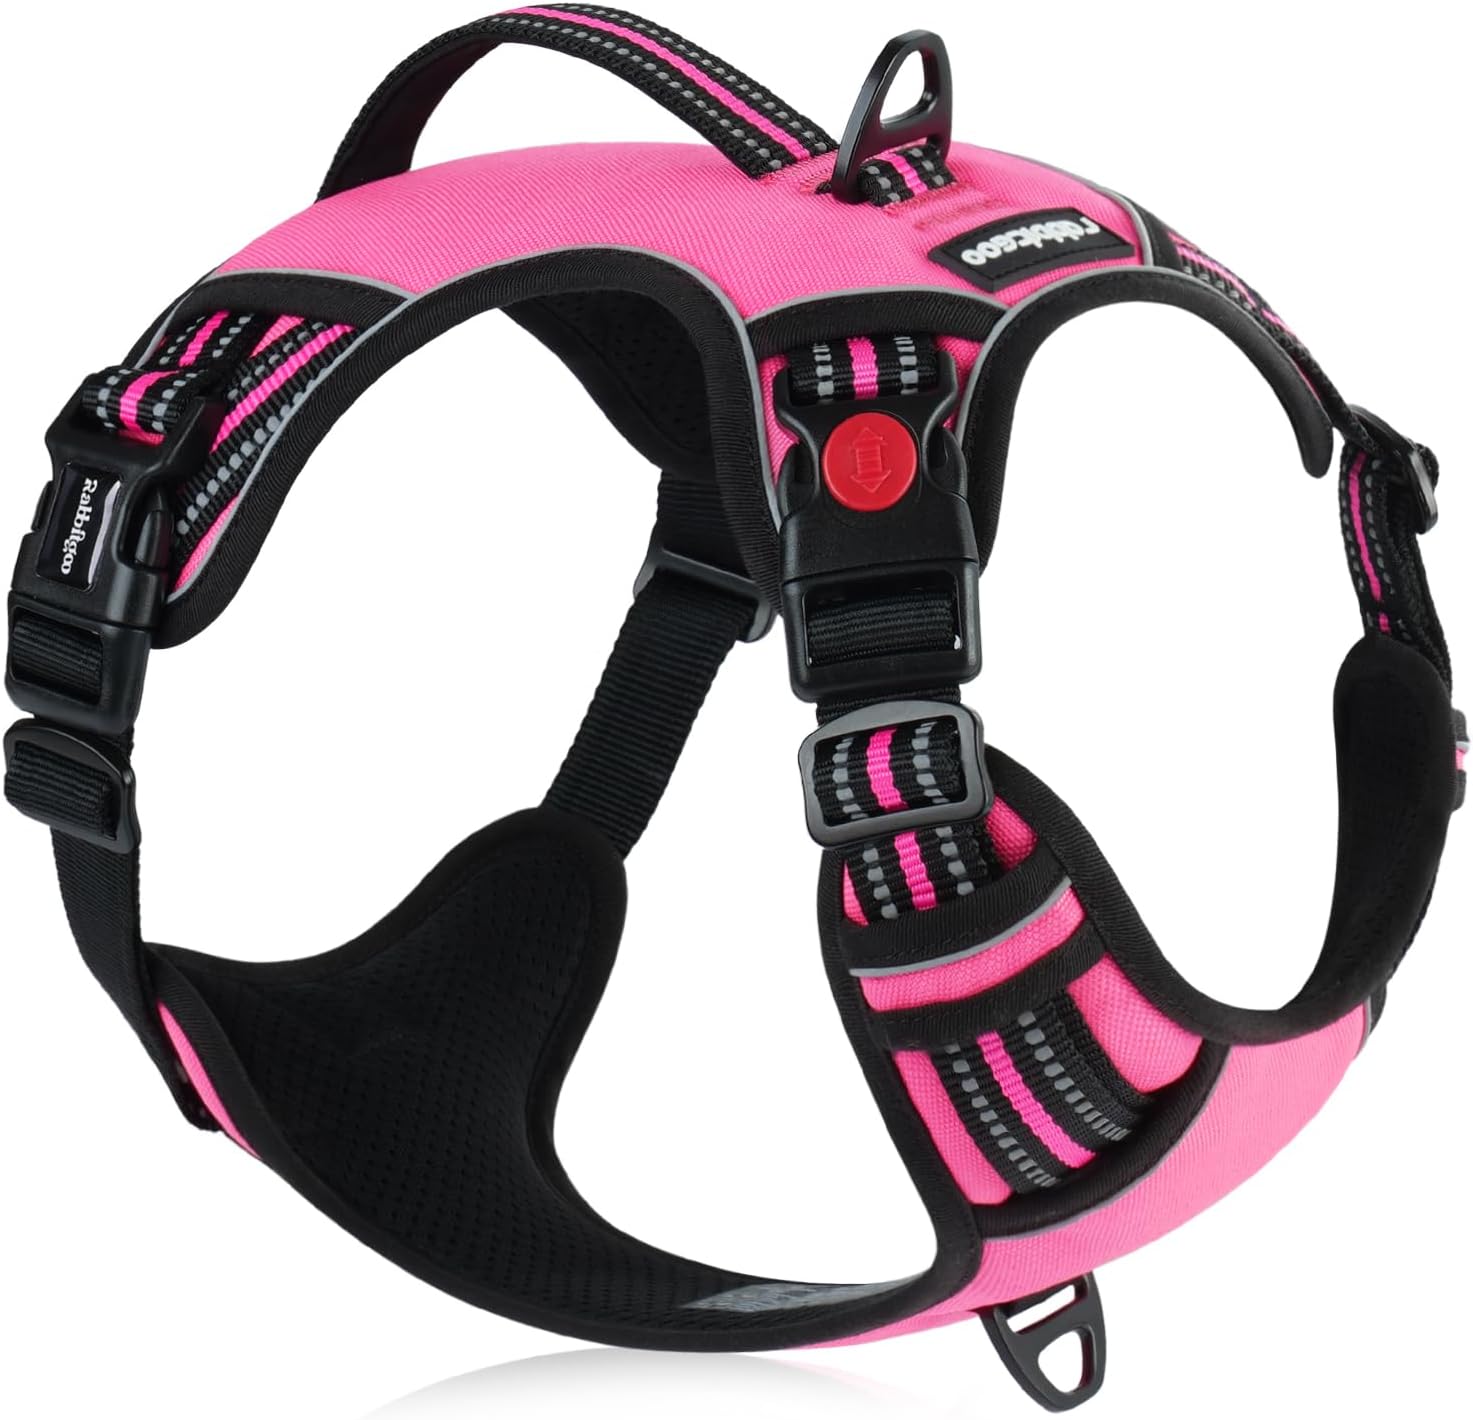 rabbitgoo Dog Harness Medium Sized, No Pull Pet Harness with Soft Padded Handle, Adjustable Reflective Vest with 3 Buckles, Easy Walking Harness with 2 Leash Clips, Pink, M